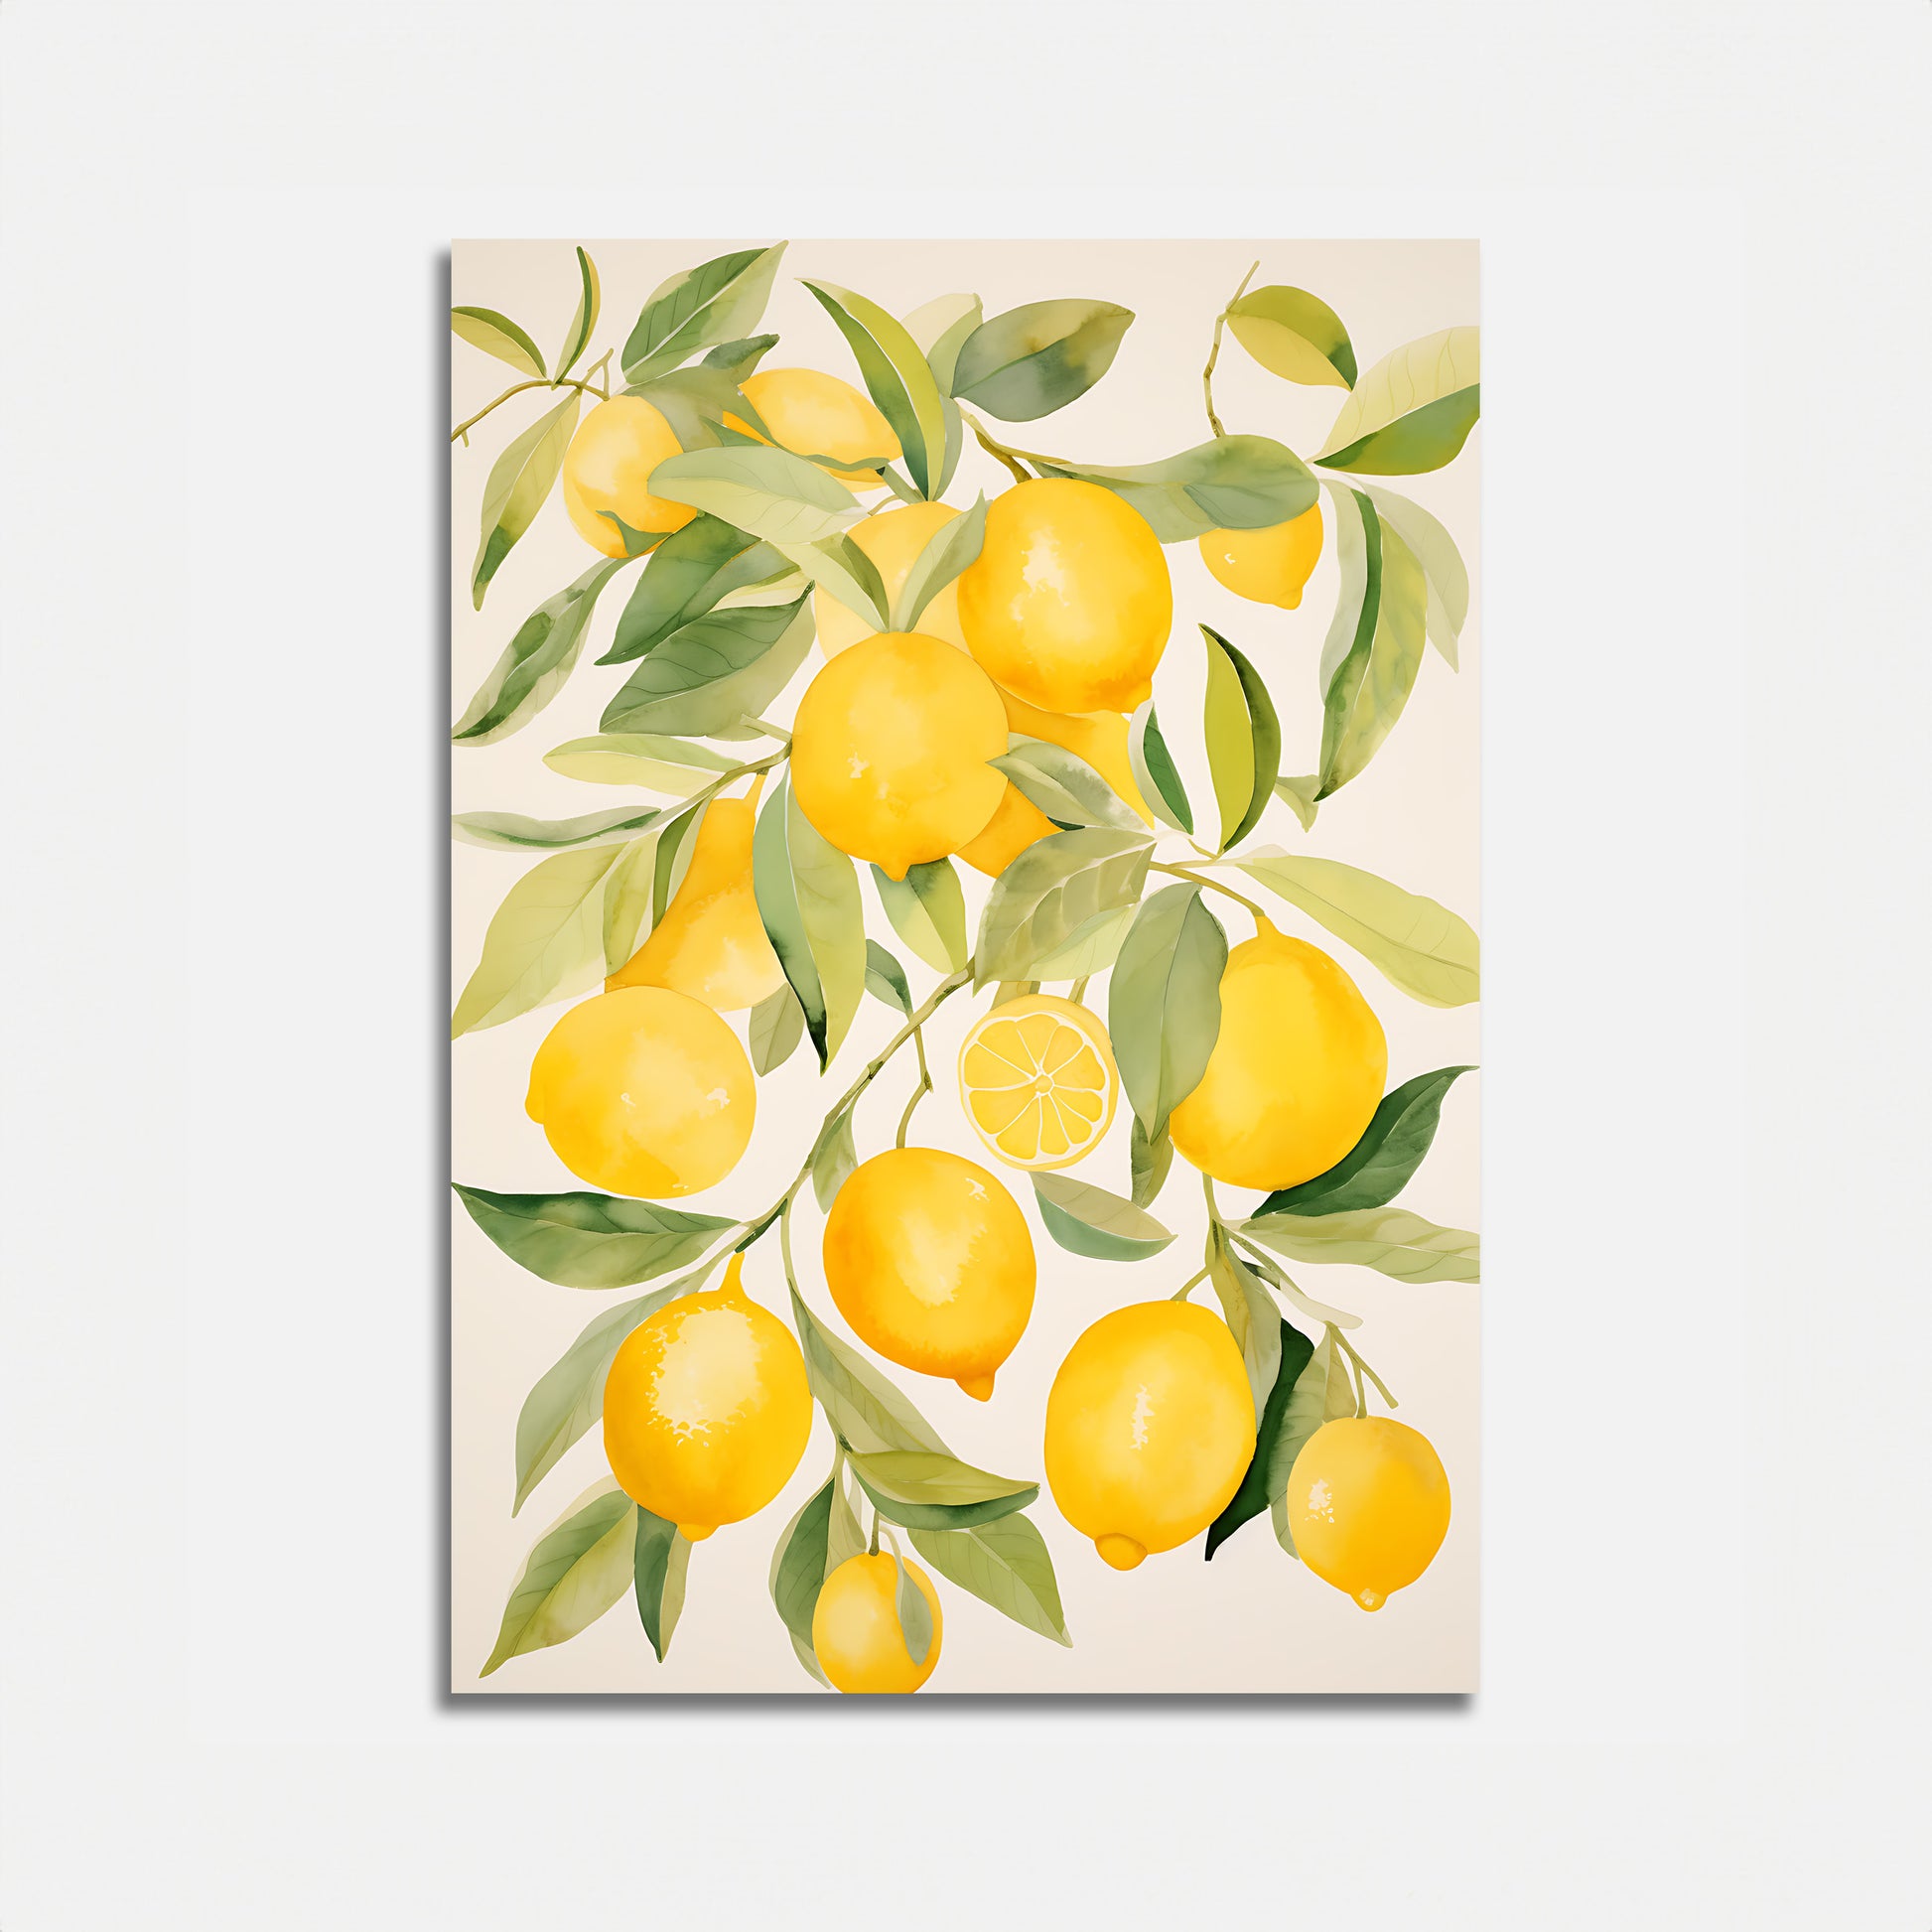 A canvas painting of yellow lemons with green leaves on a white background.